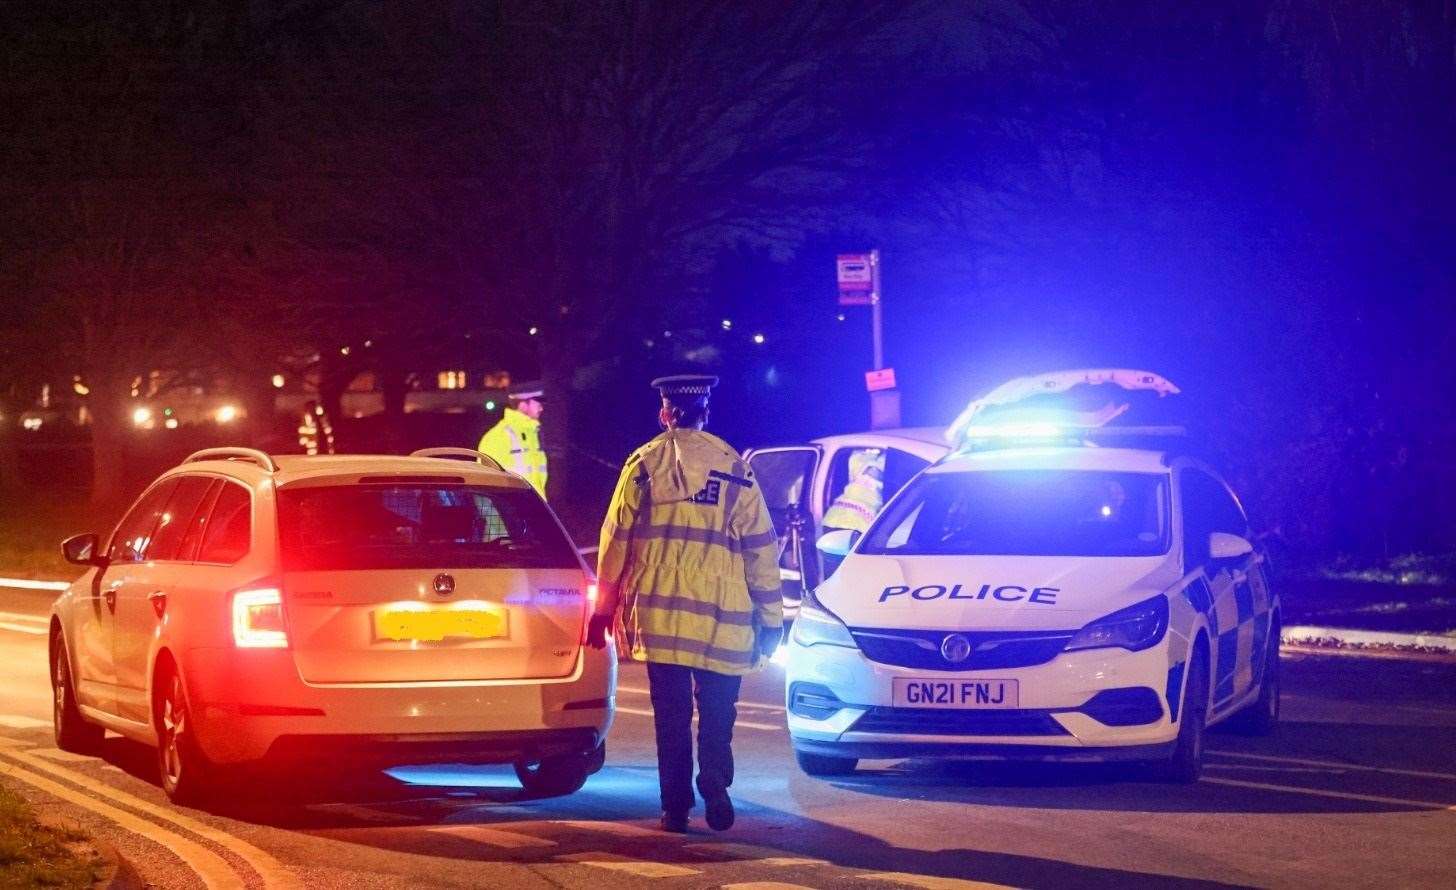 Police at the scene of the crash at Leysdown on Tuesday night. Picture: UKNIP